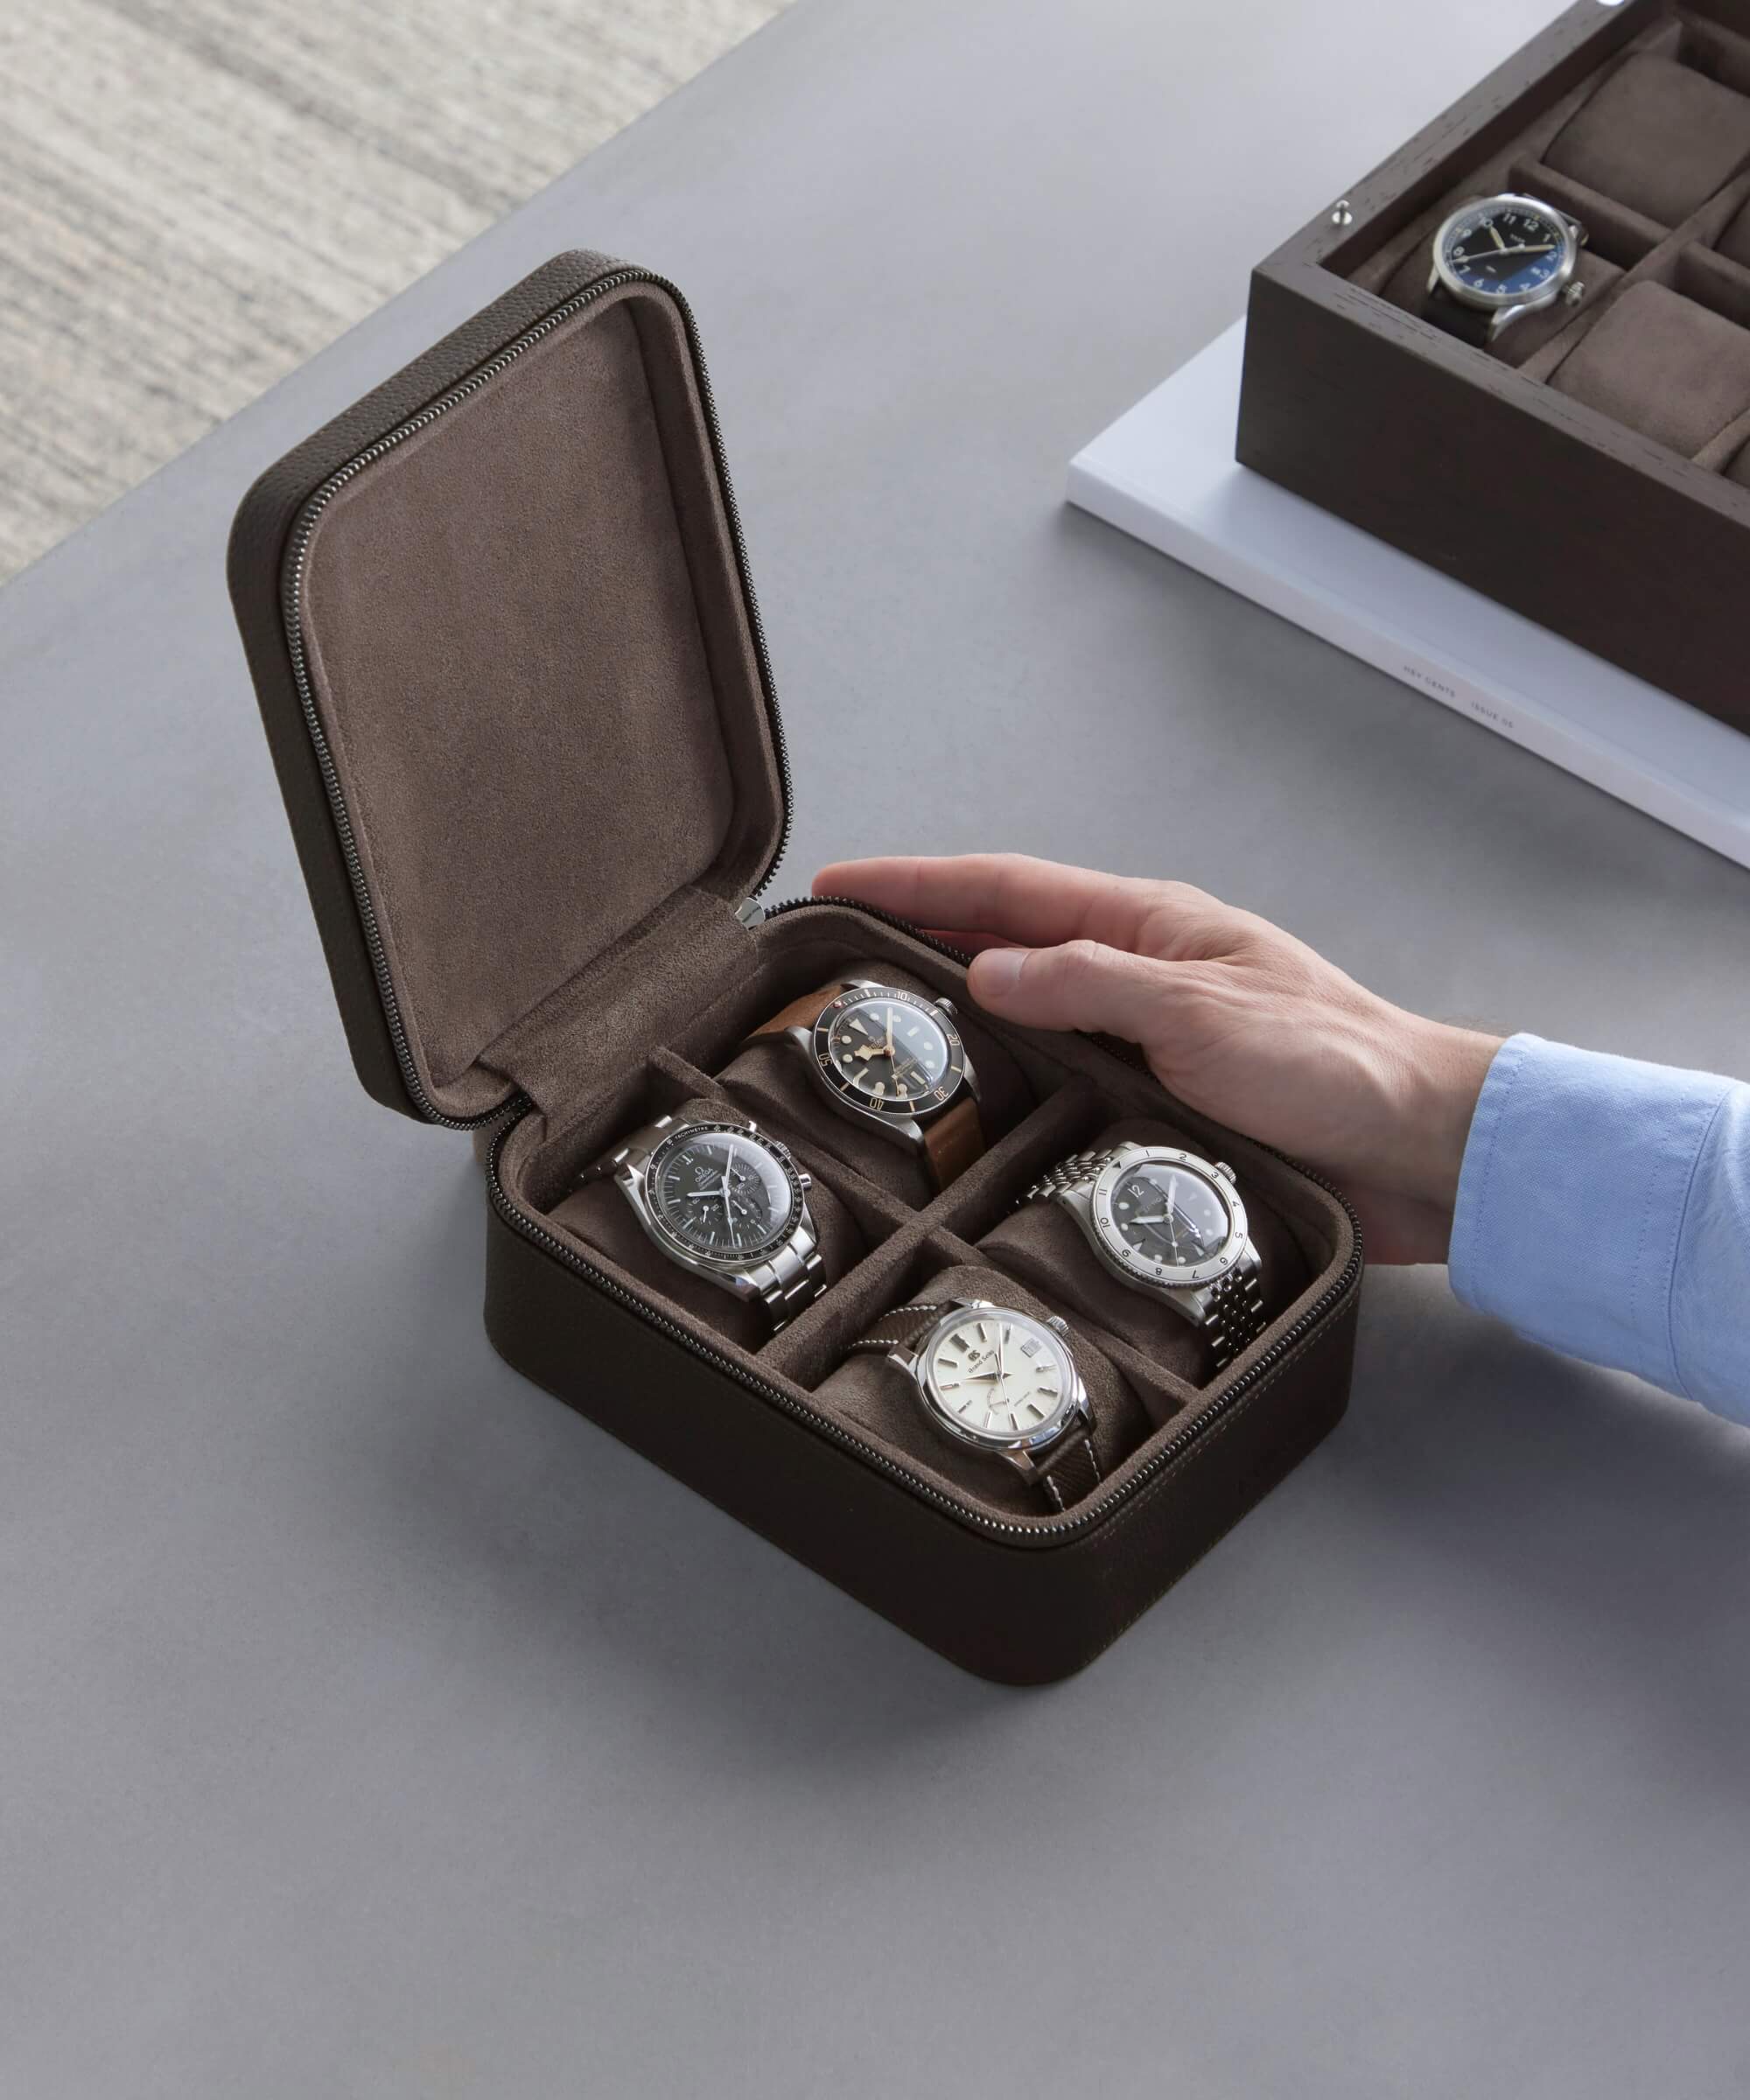 A person is holding an open Fraser 4 Watch Travel Case - Brown (Coming Soon) by TAWBURY containing five different wristwatches, with more watches visible in a luxury leather watch case on the table.